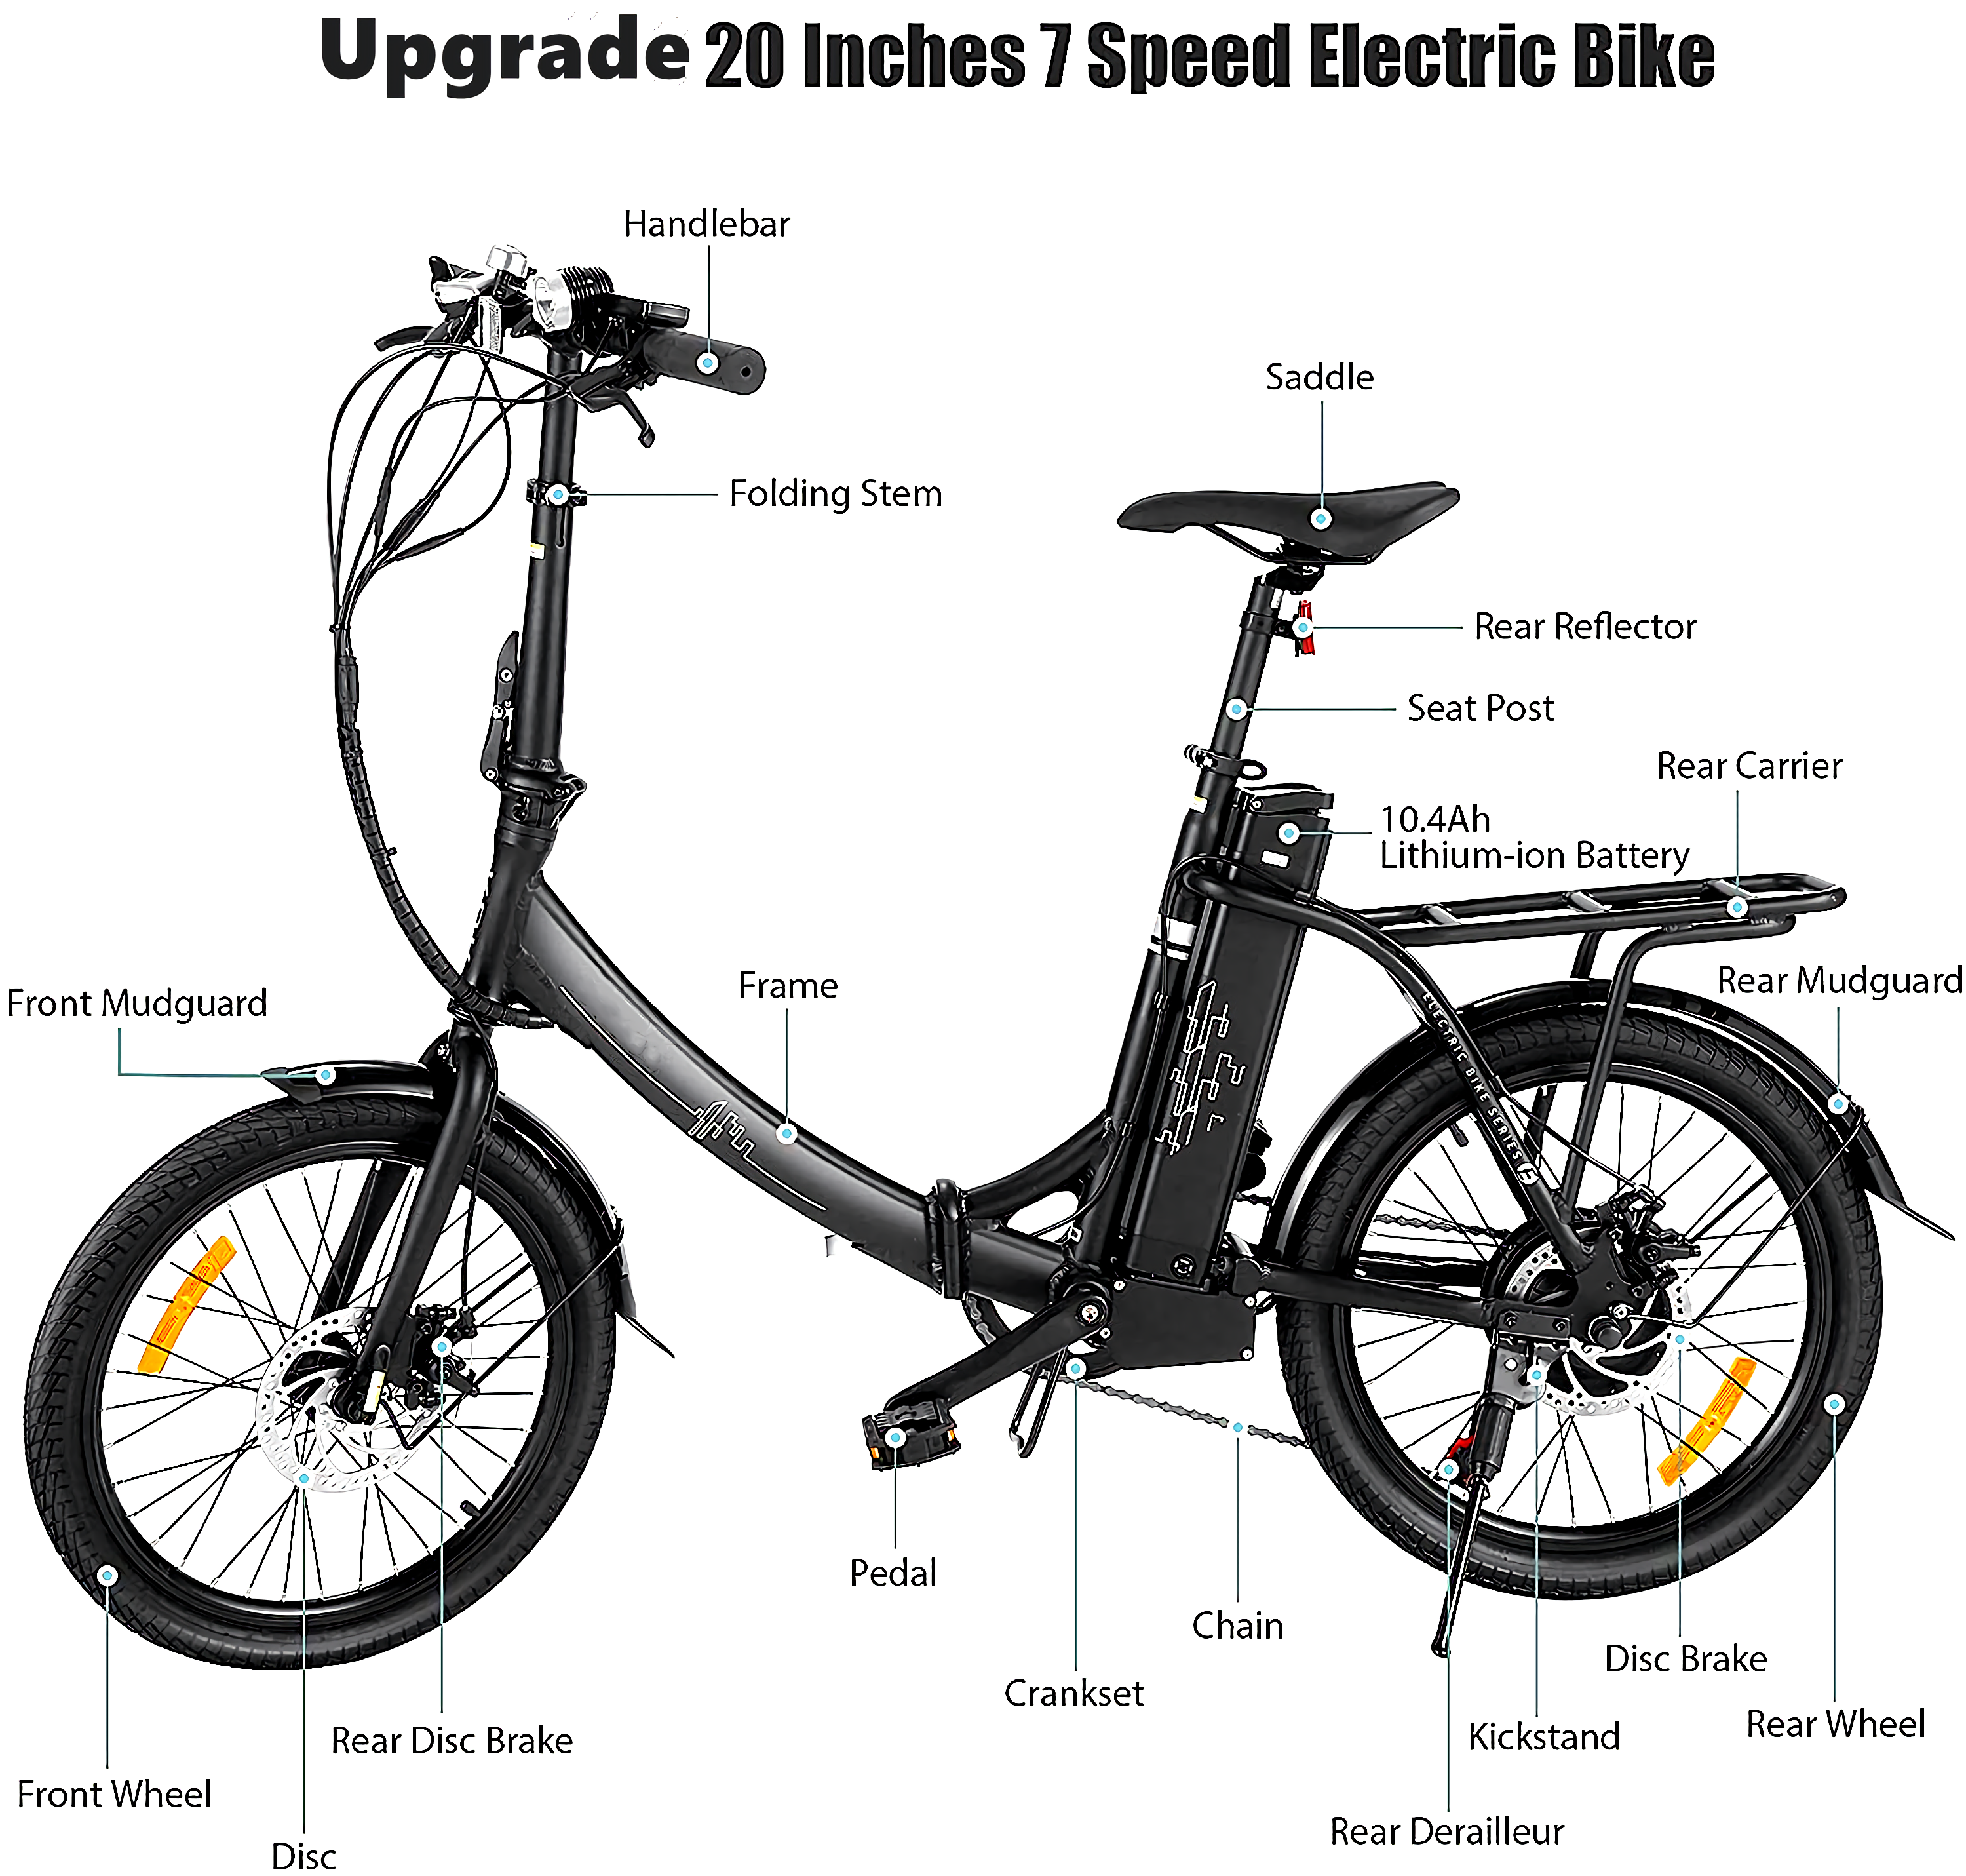 20'' Folding Electric Bike 350W Electric Mountain Bicycle for Adults, 20MPH Commuter E-Bike Throttle & Pedal Assist Moped City Commuter Bicycle, Shimano 7 Speed